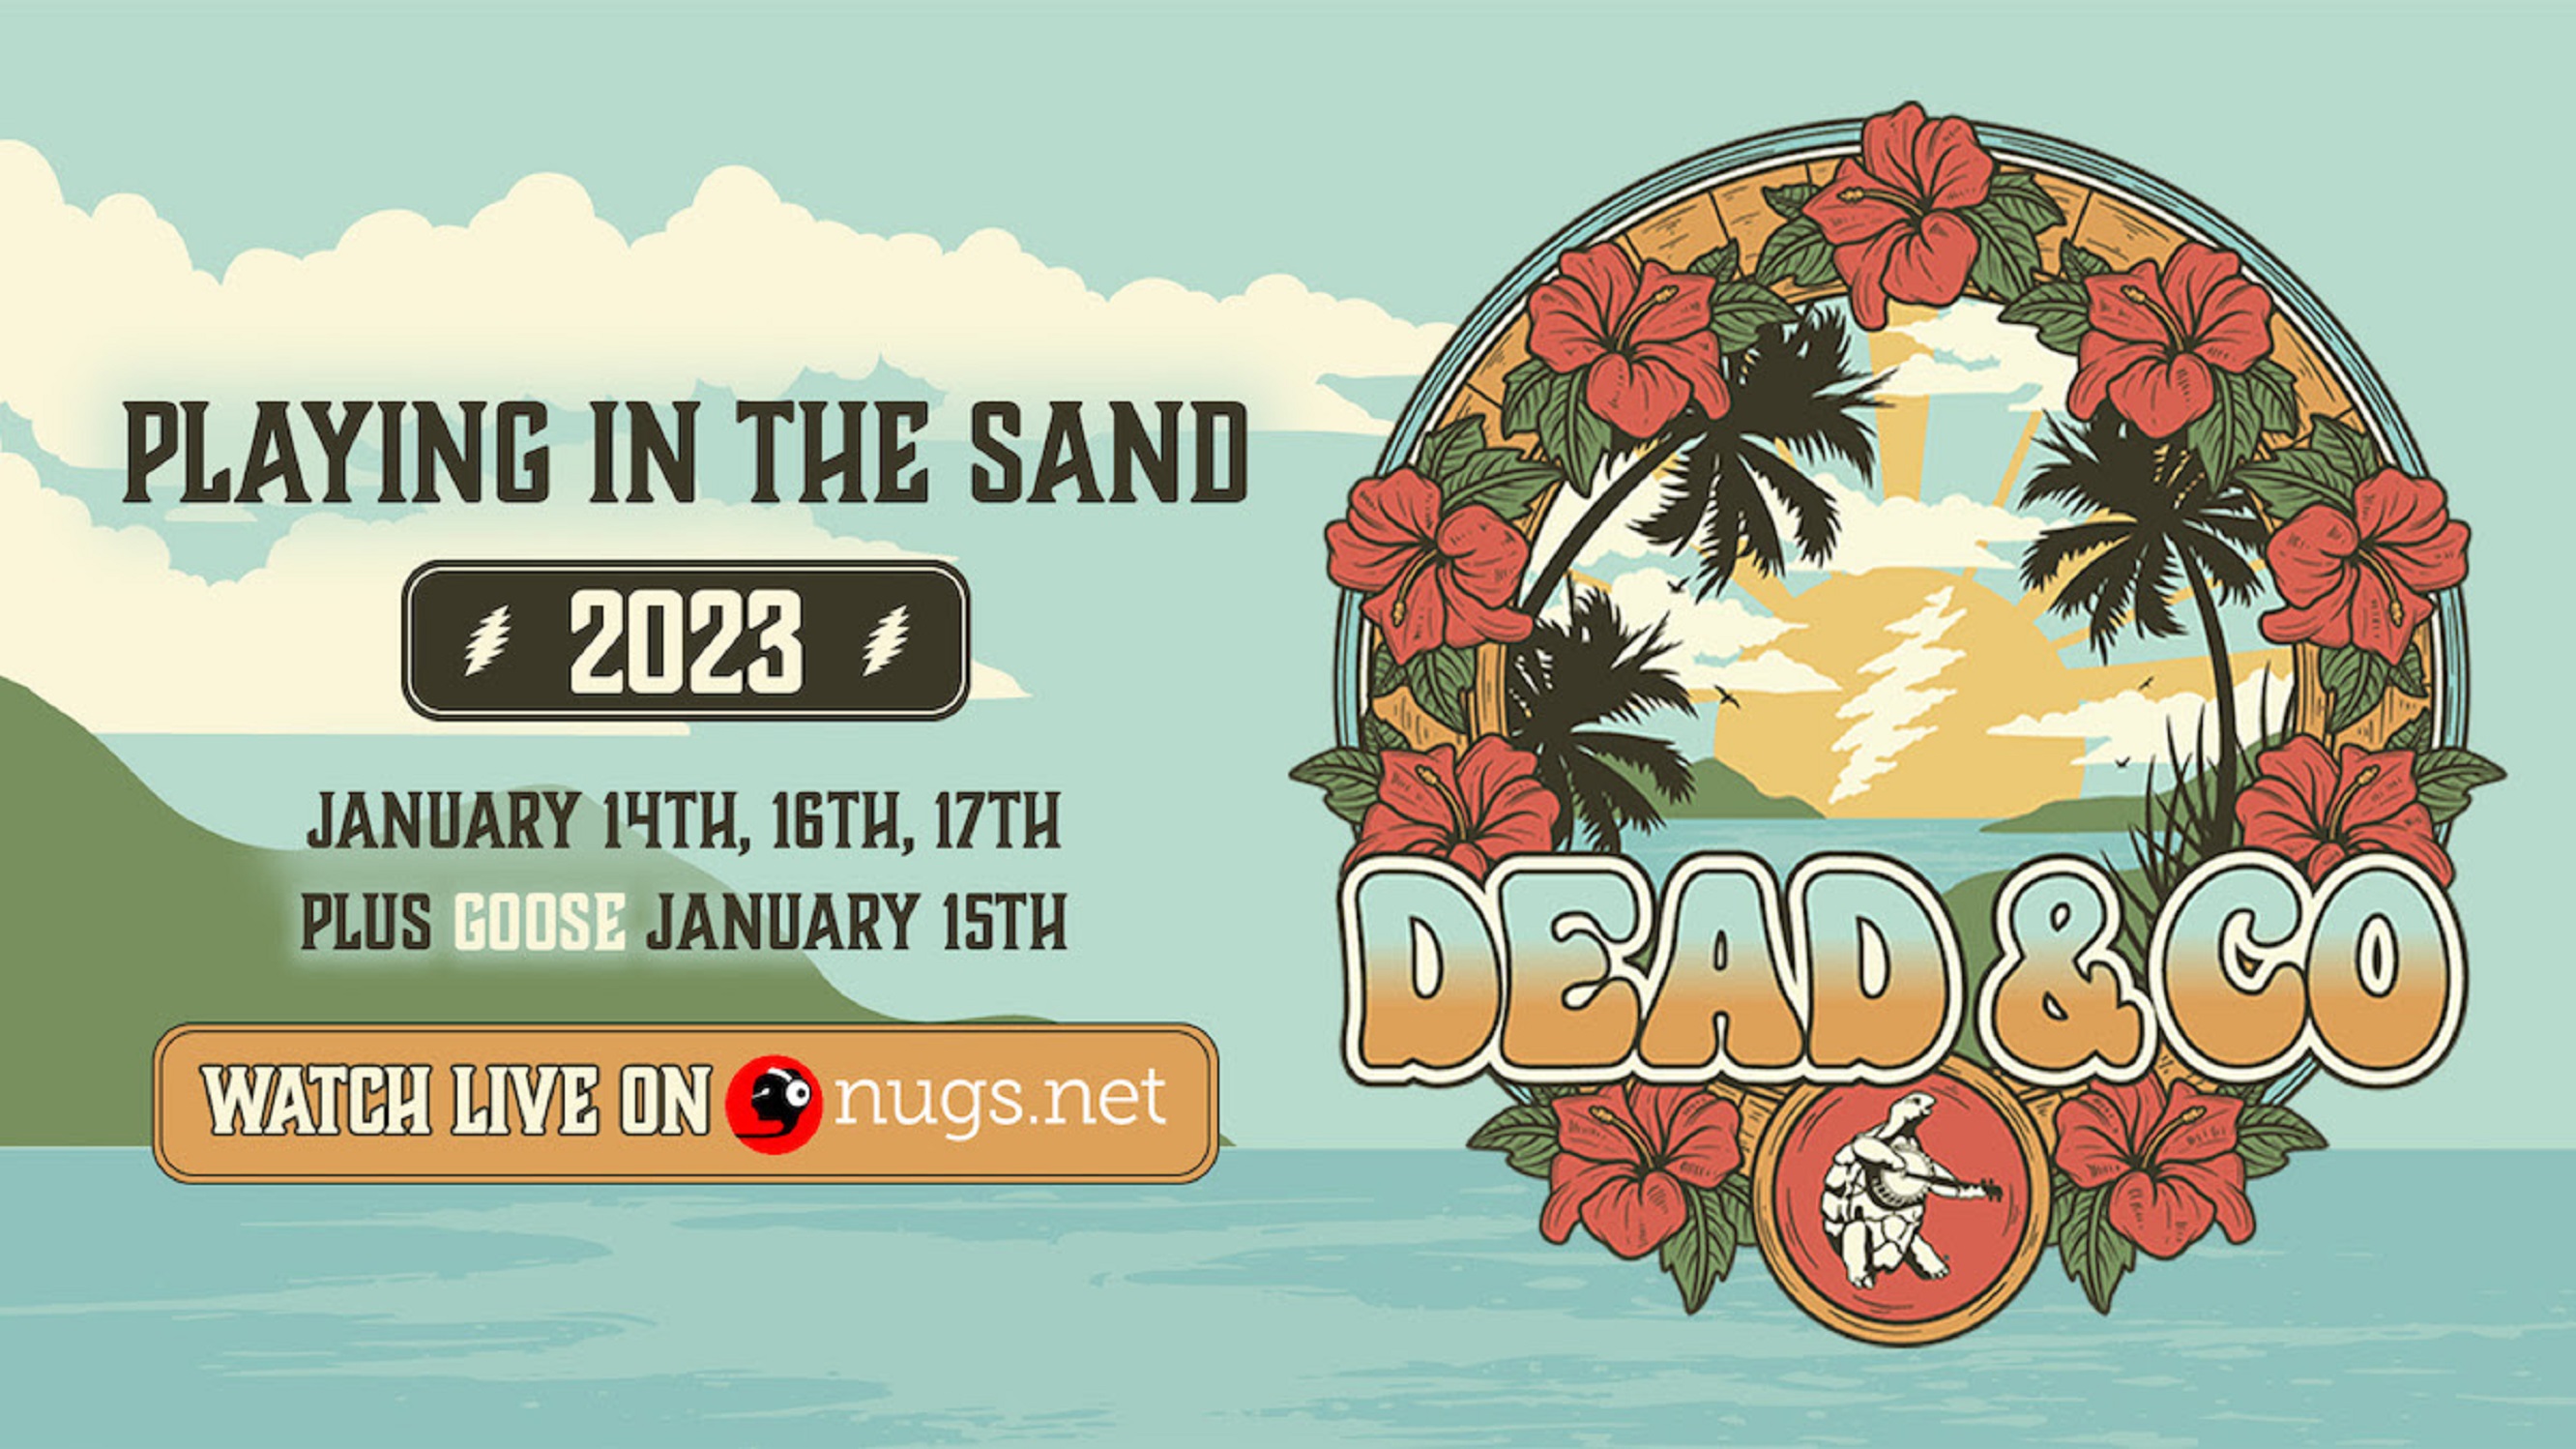 Just 8 days till Playing In The Sand!